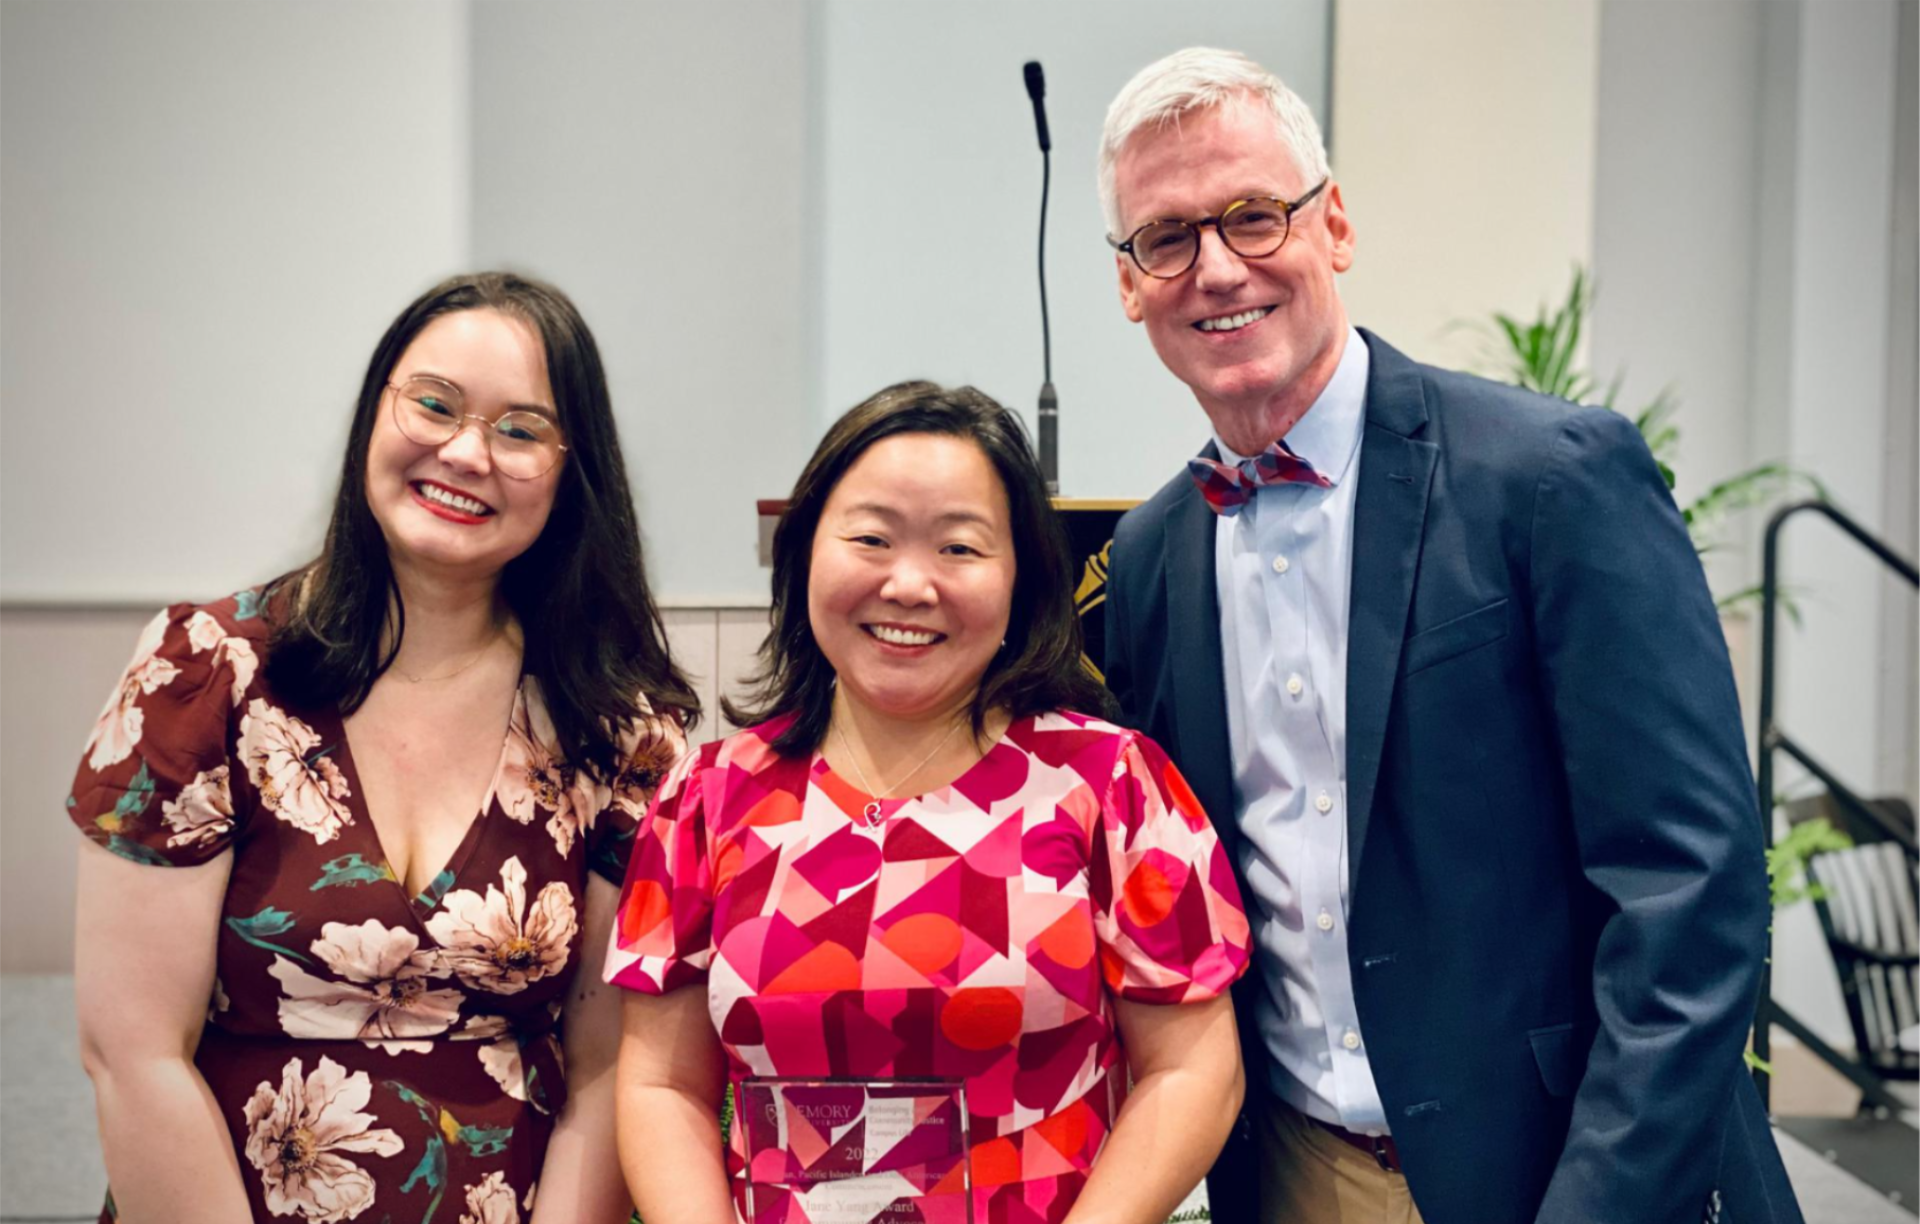 jane yang with colleagues receives AAPI award